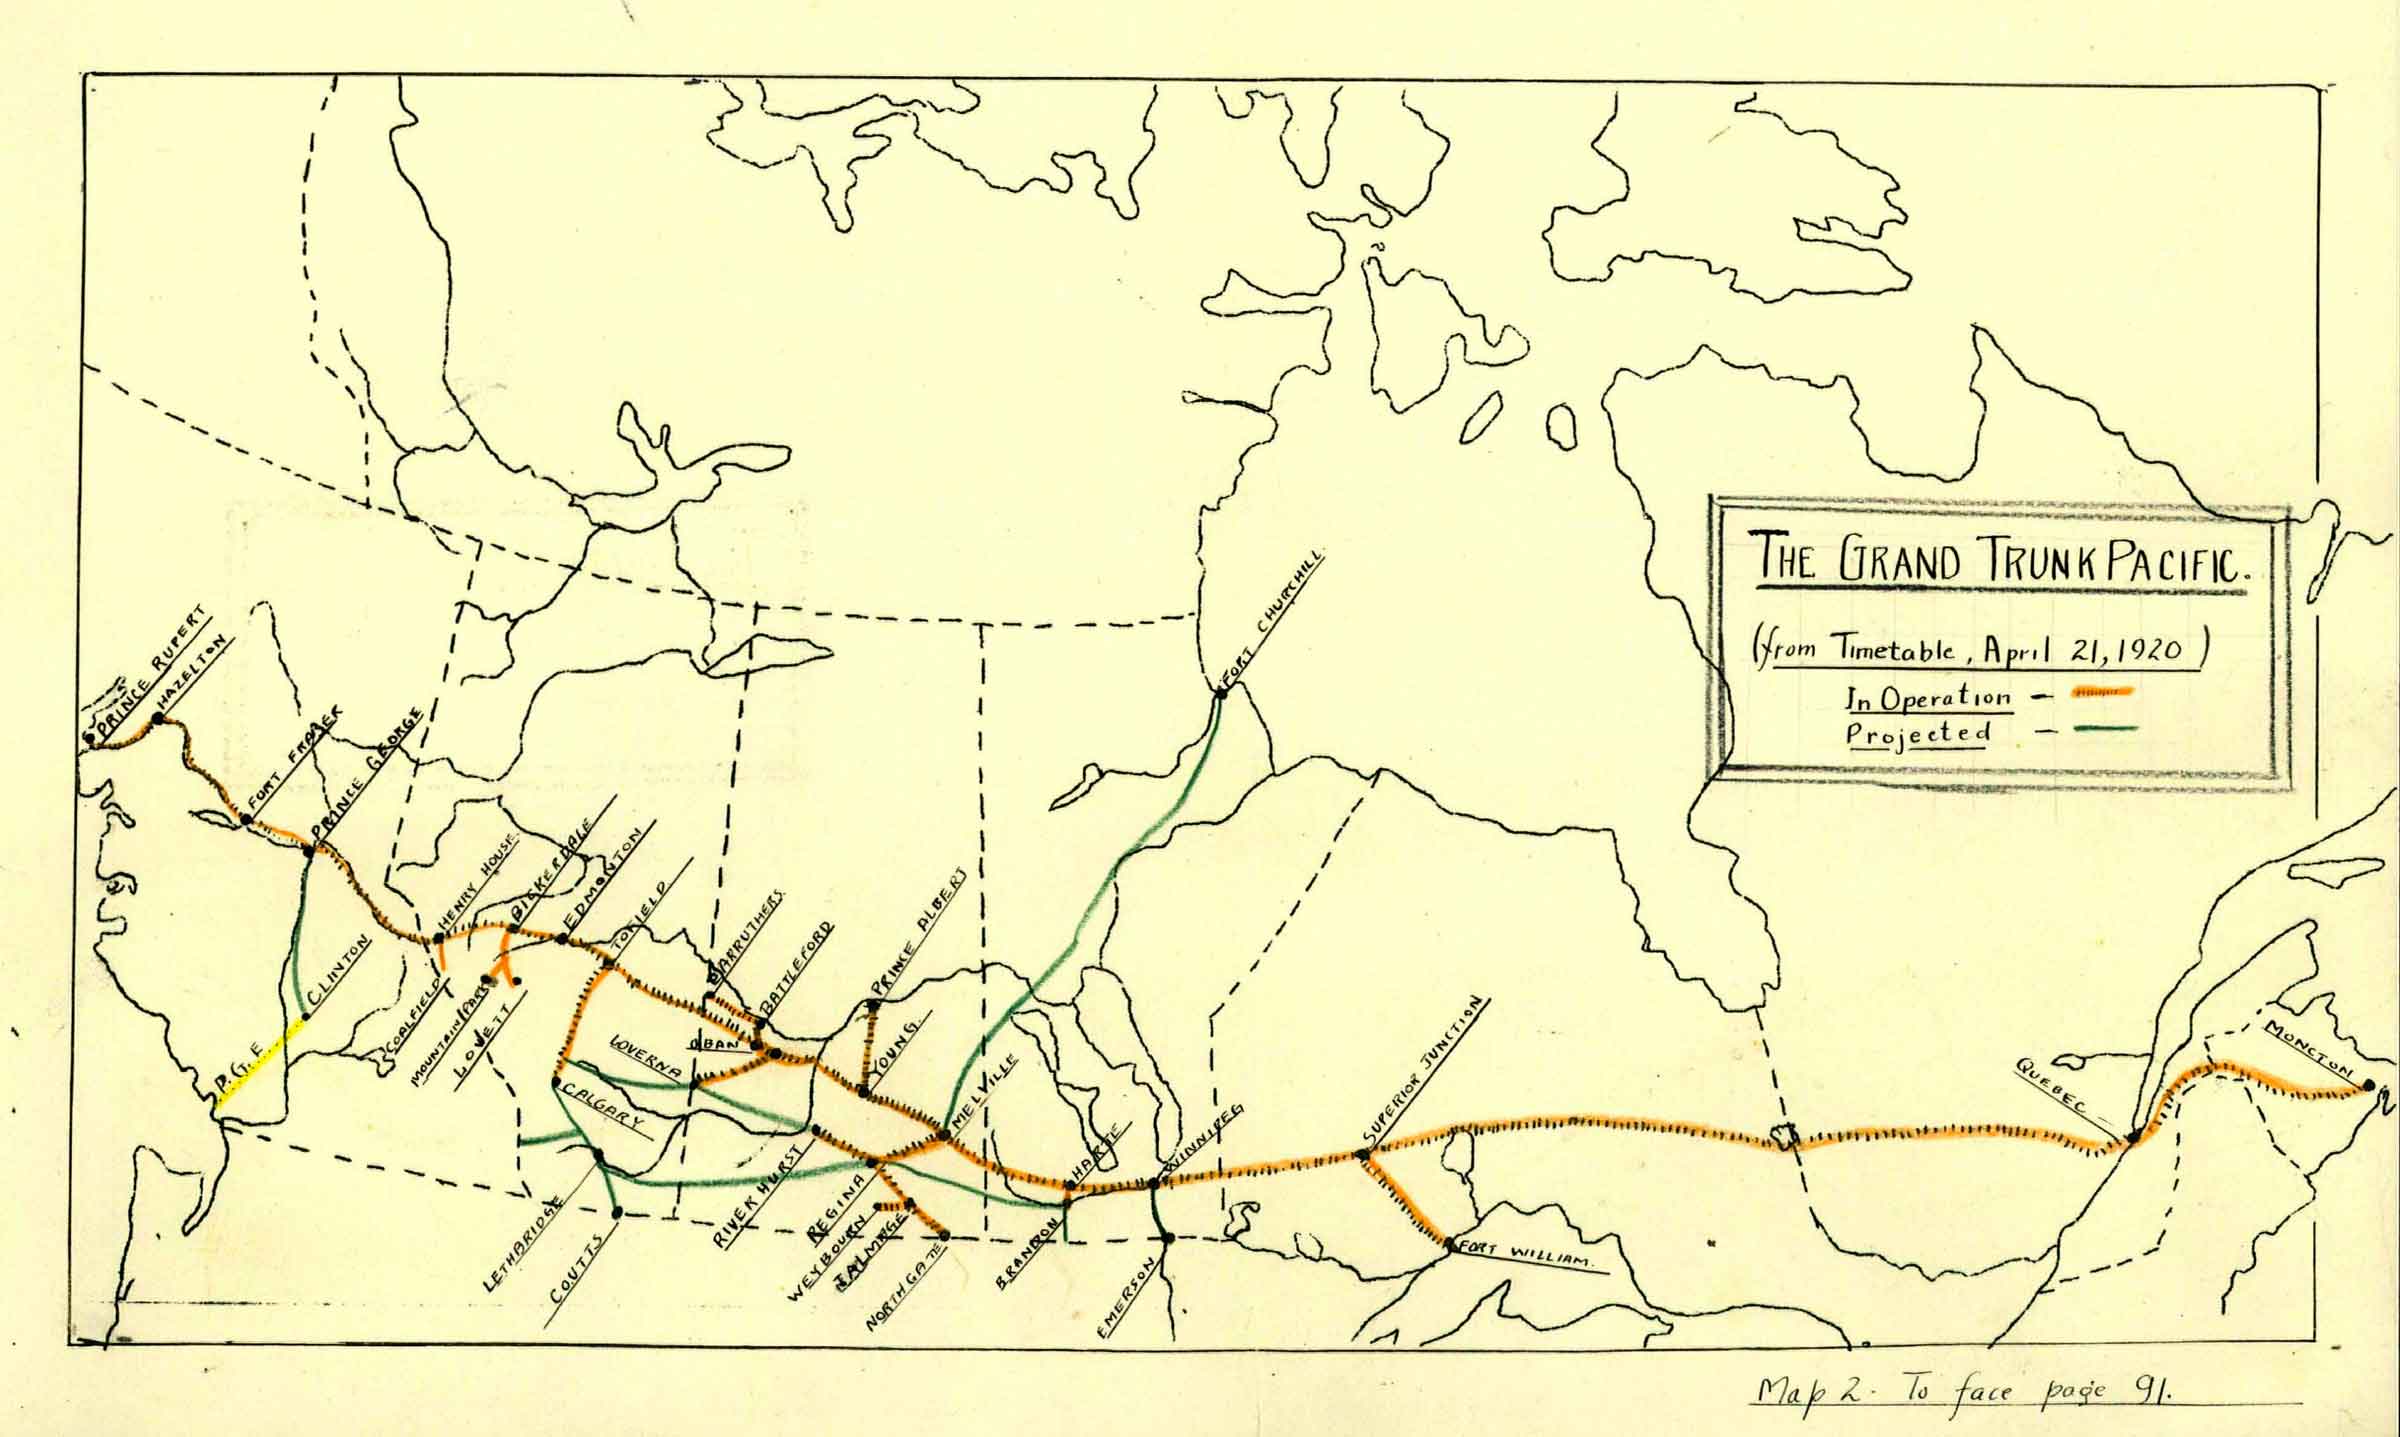 Lower, Joseph Arthur. The Grand Trunk Pacific Railway, projected and operational routes, 1920